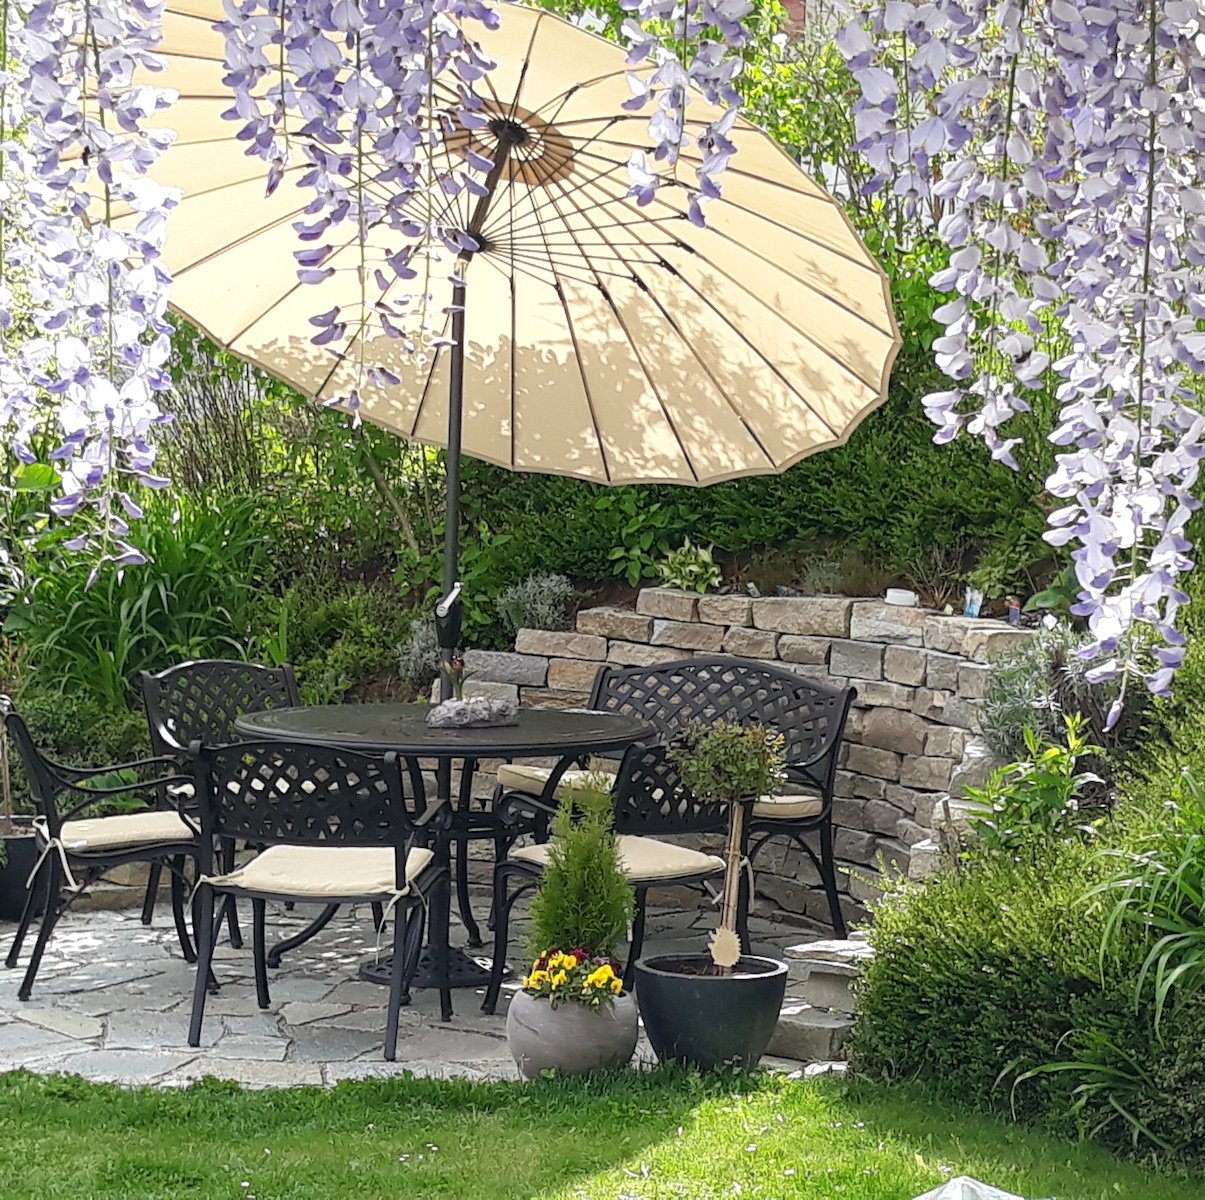 Pair your patio table and chairs with a parasol and cushions